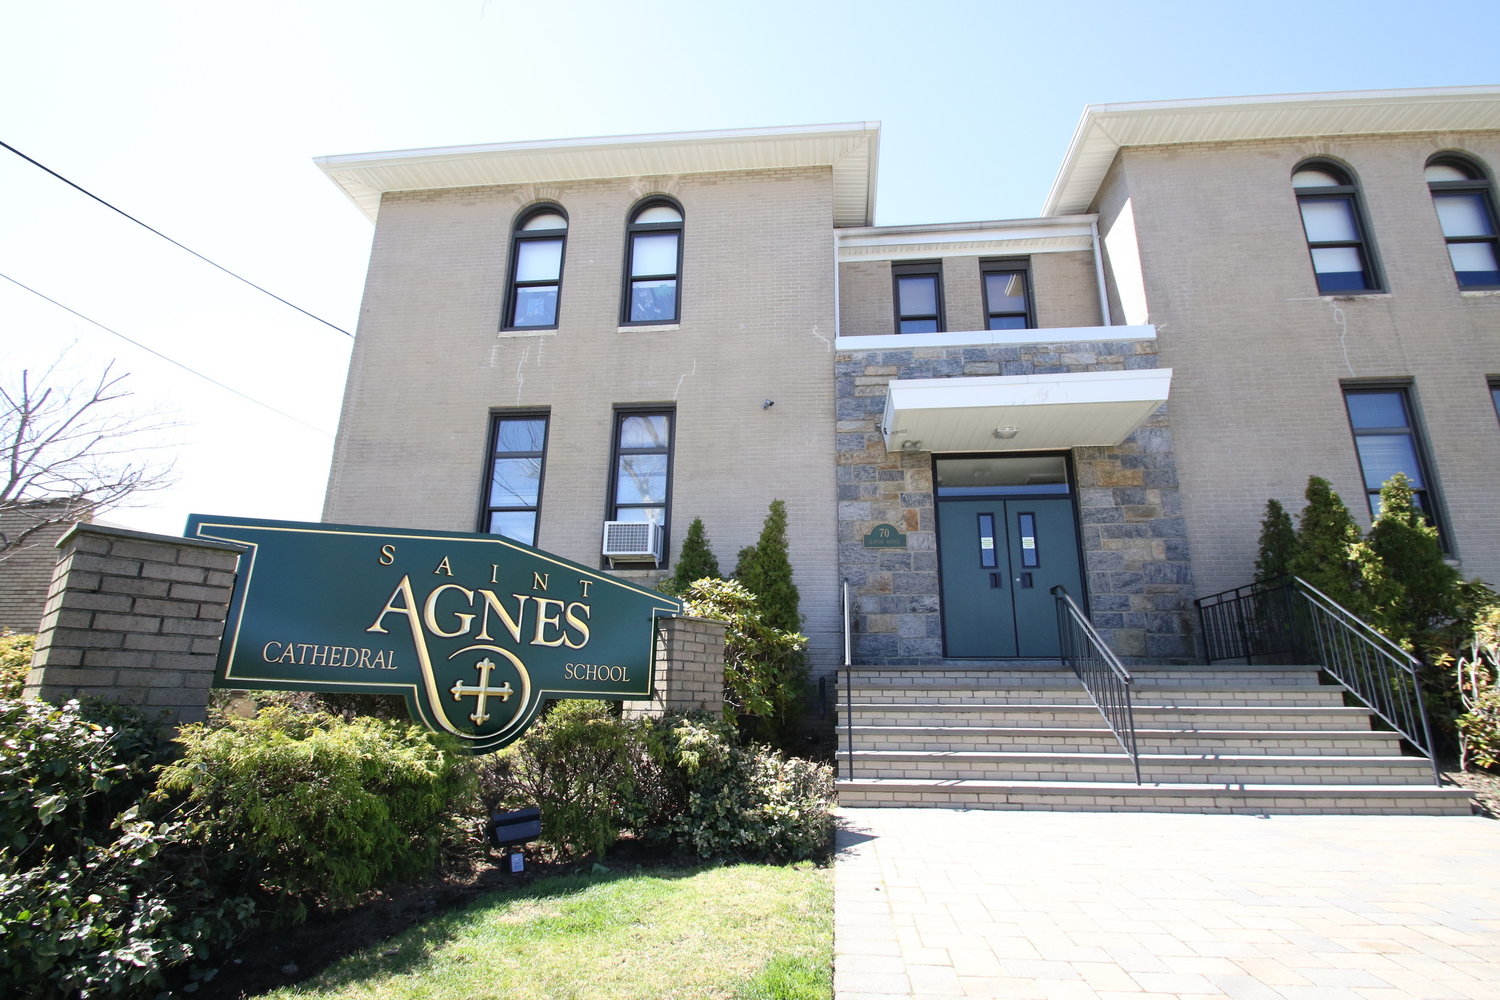 The St. Agnes school Board will host a Casino Night on May 14 to raise funds for the school’s budget.